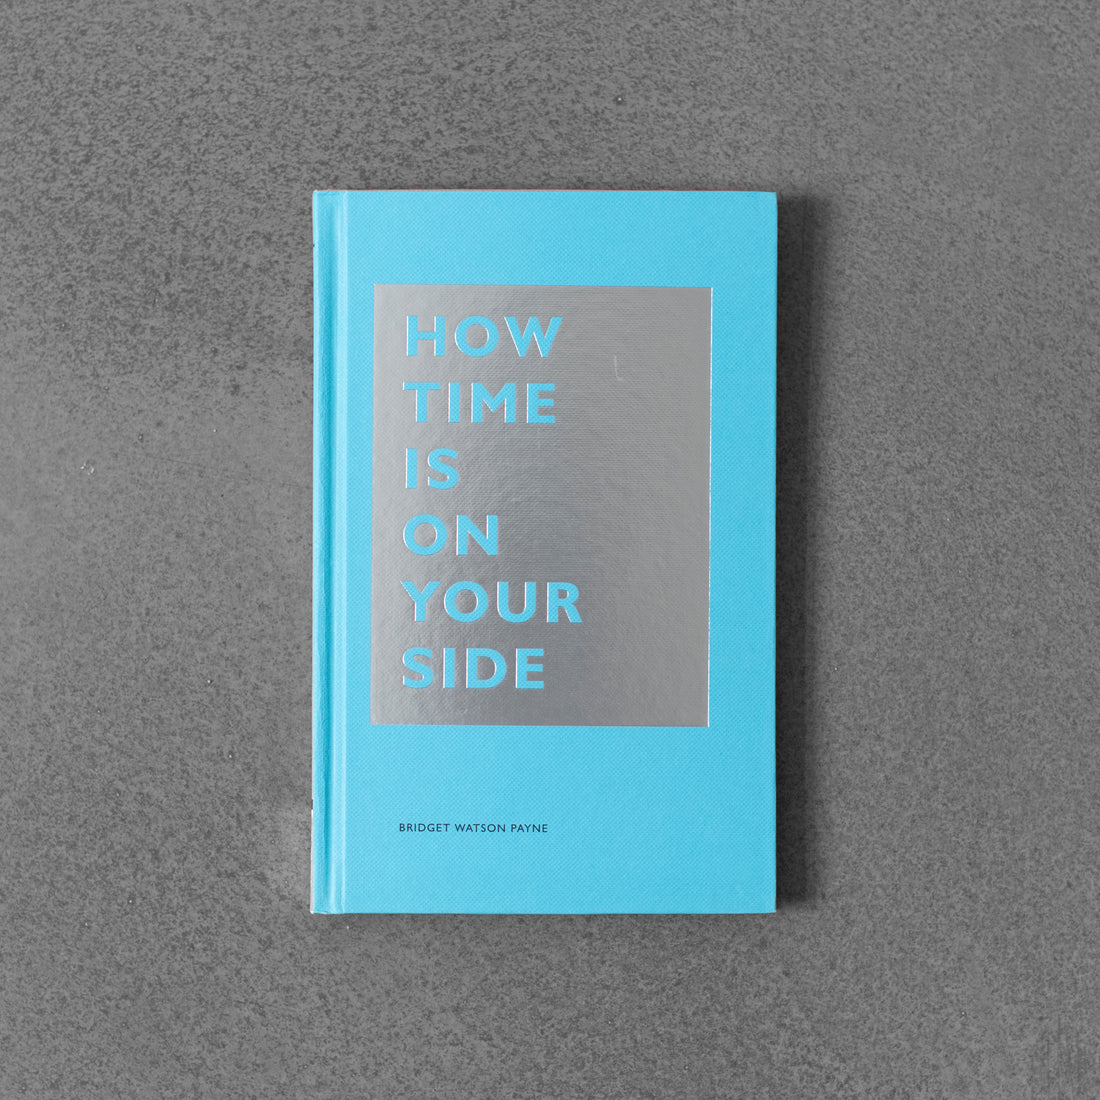 How Time Is on Your Side - Bridget Watson Payne